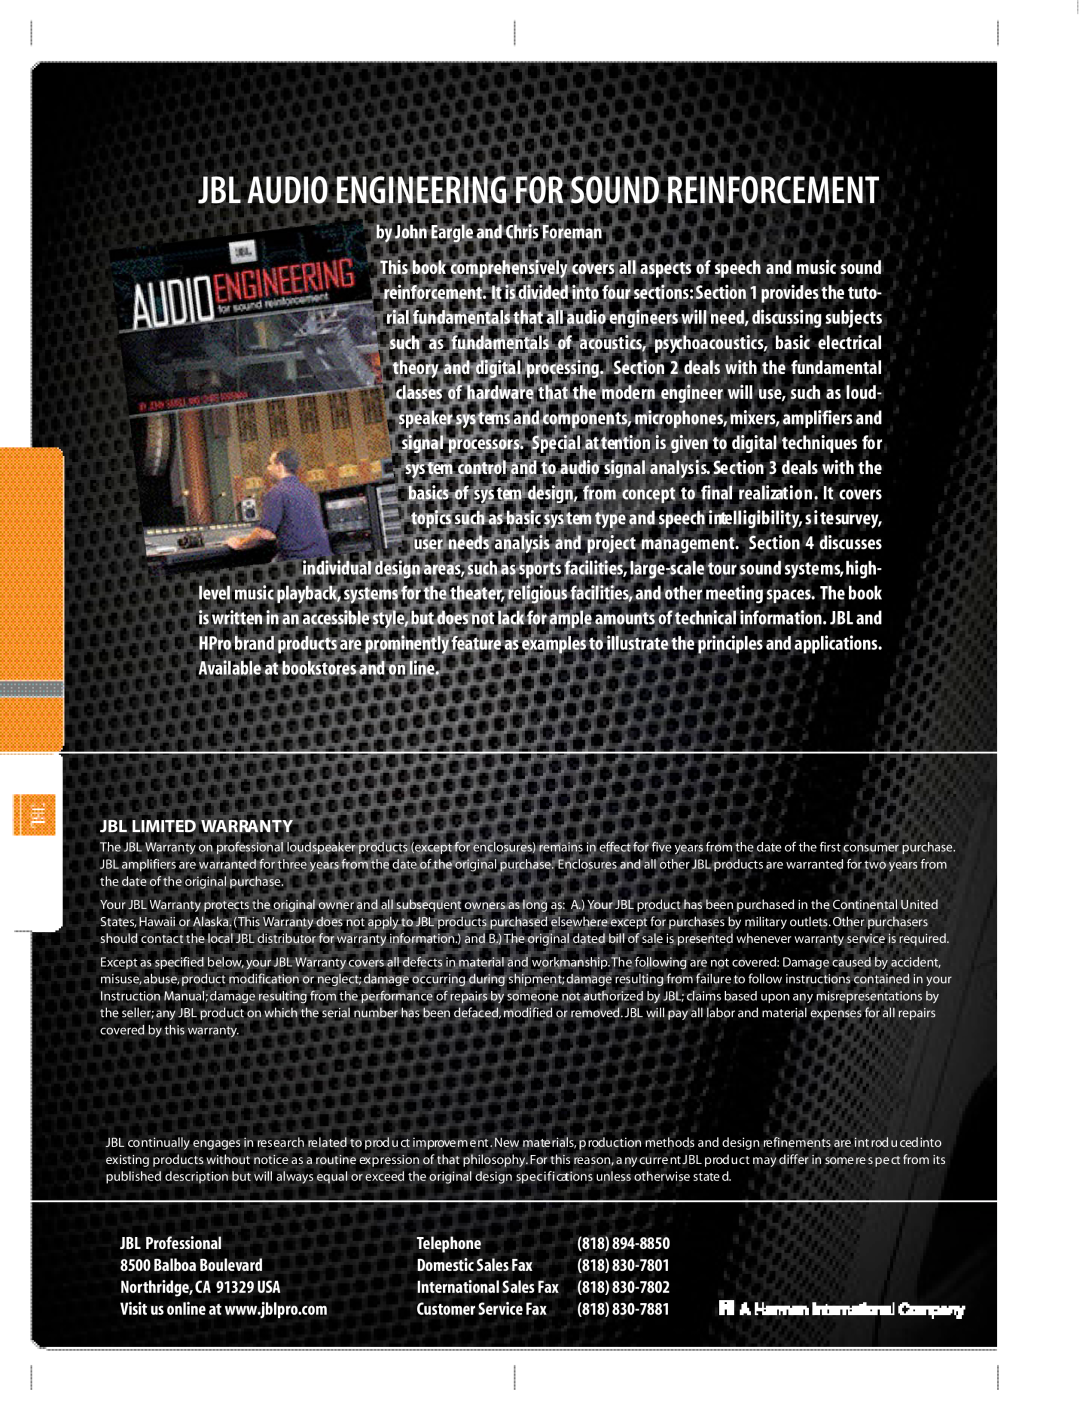 JBM electronic Studio Monitors Jbl Audio Engineering For Sound Reinforcement, by John Eargle and Chris Foreman, Telephone 